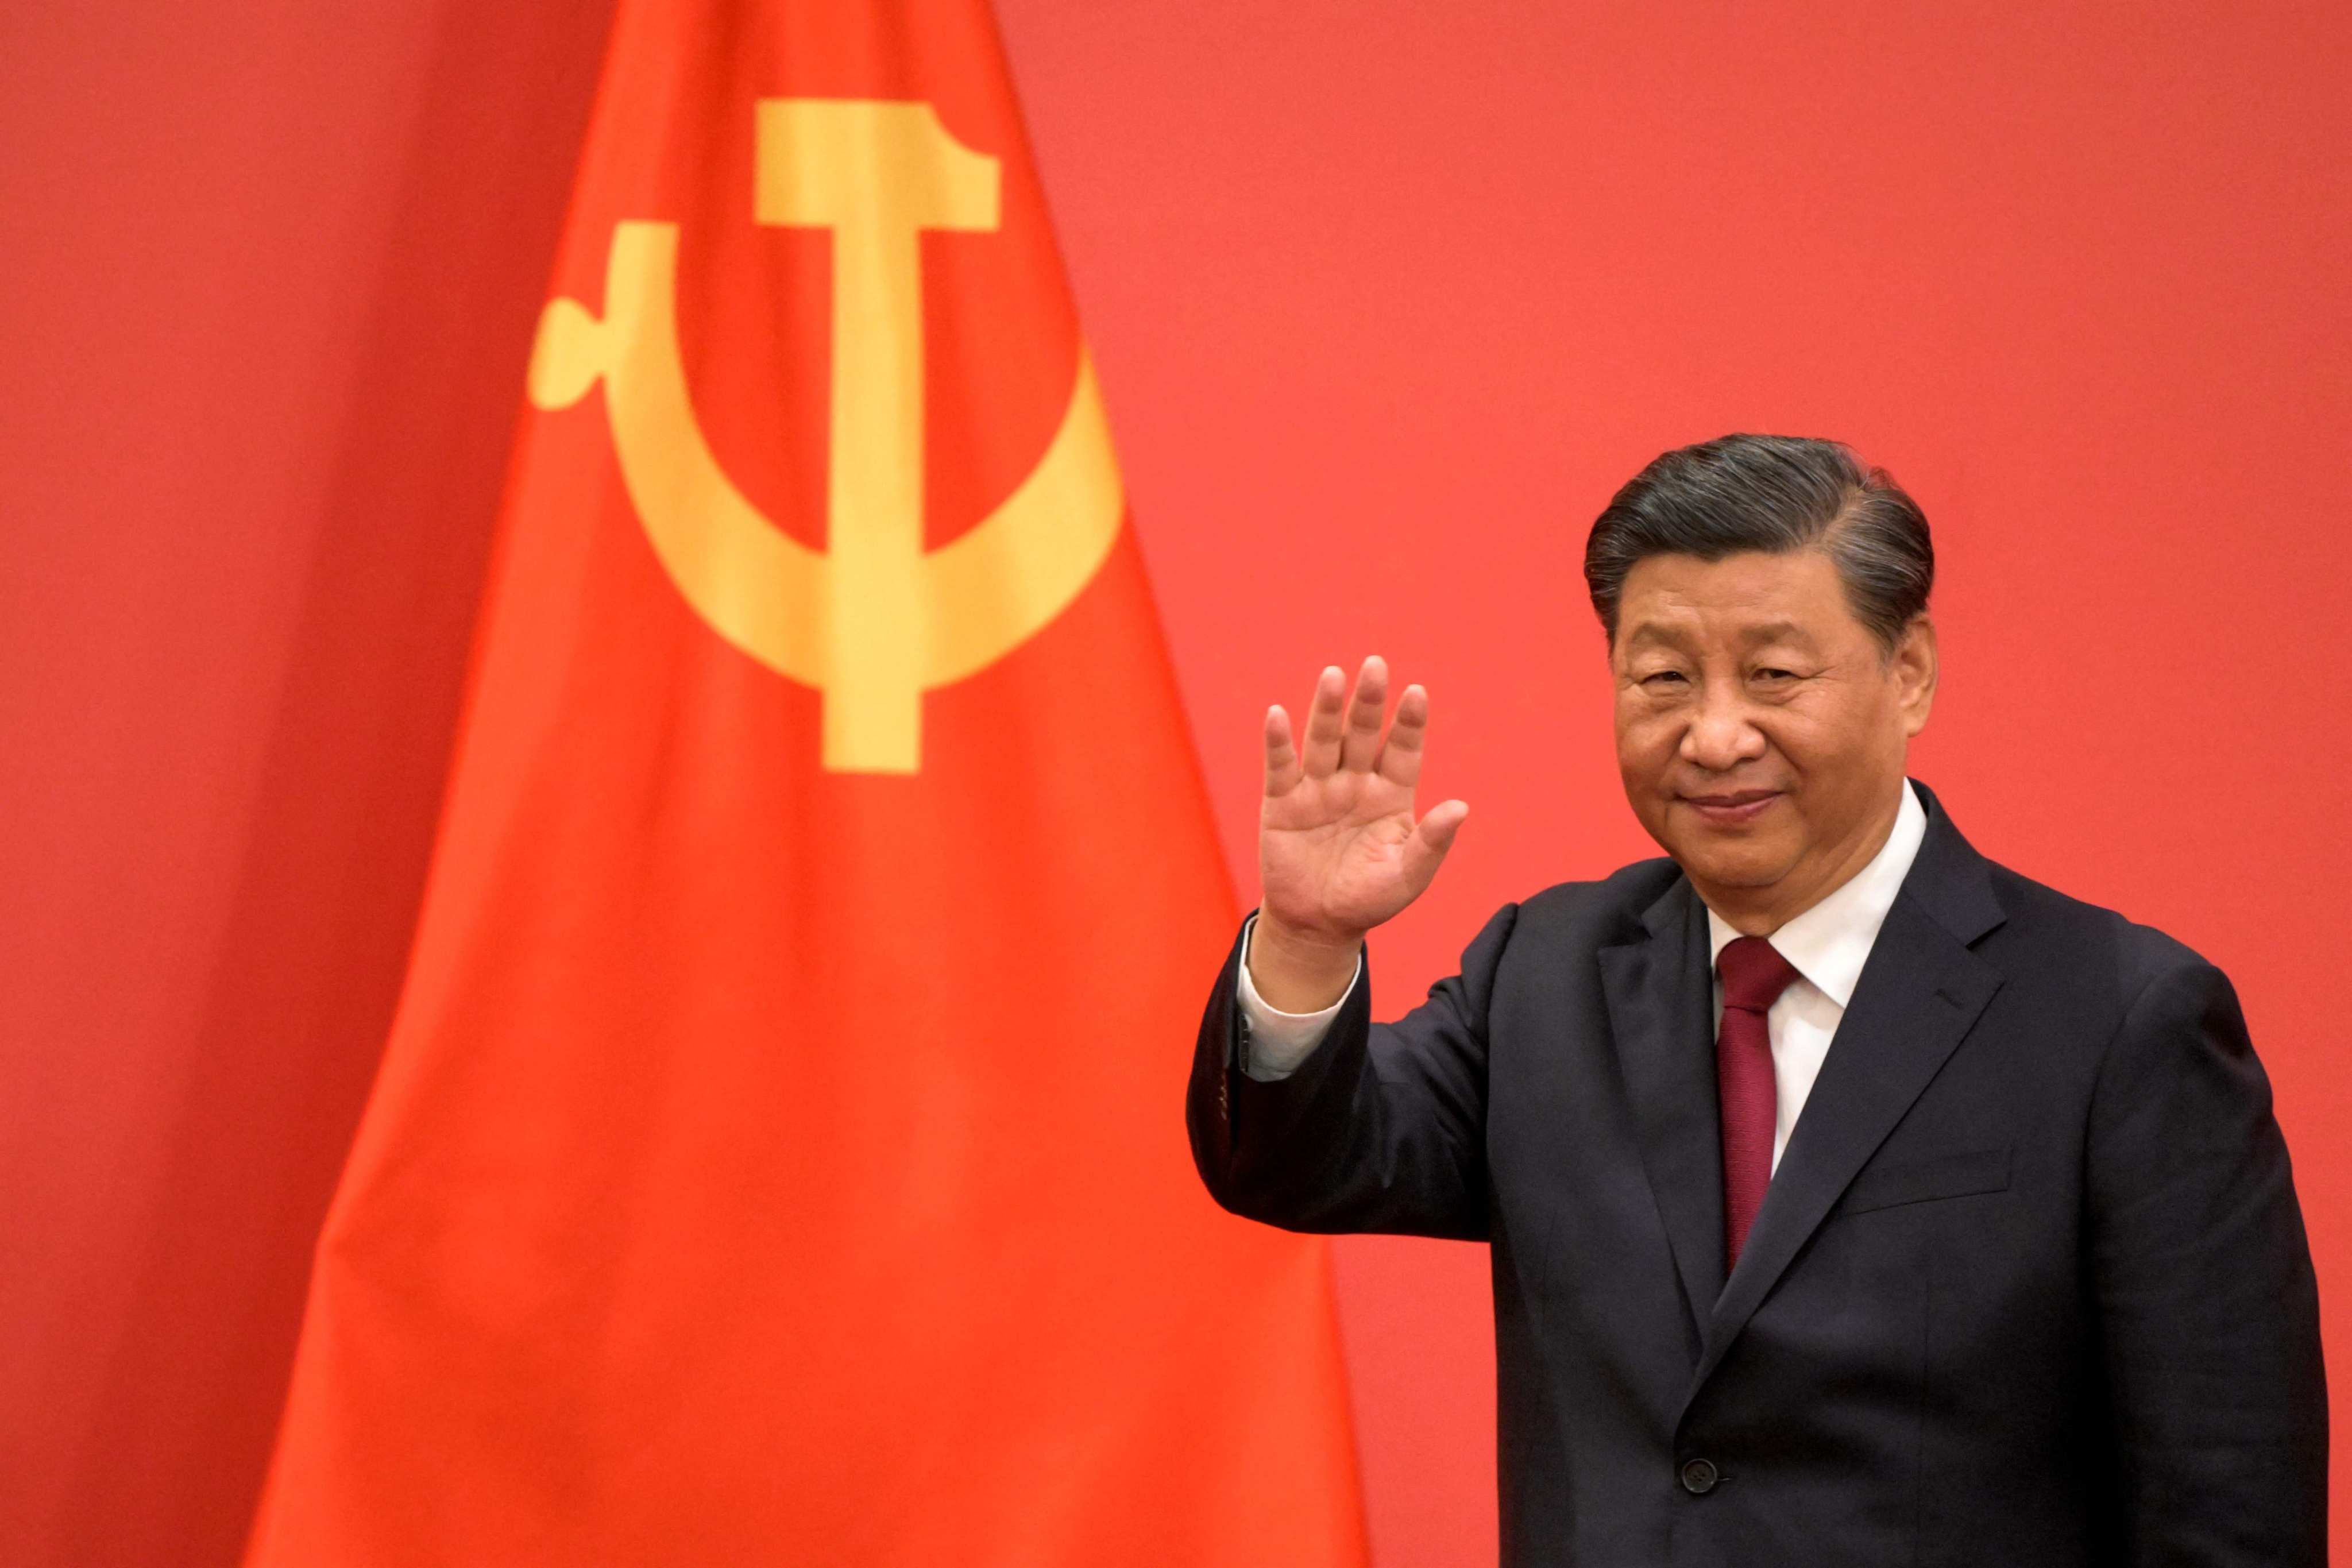 Xi Jinping is widely regarded as the most powerful Chinese leader in decades. Photo: AFP